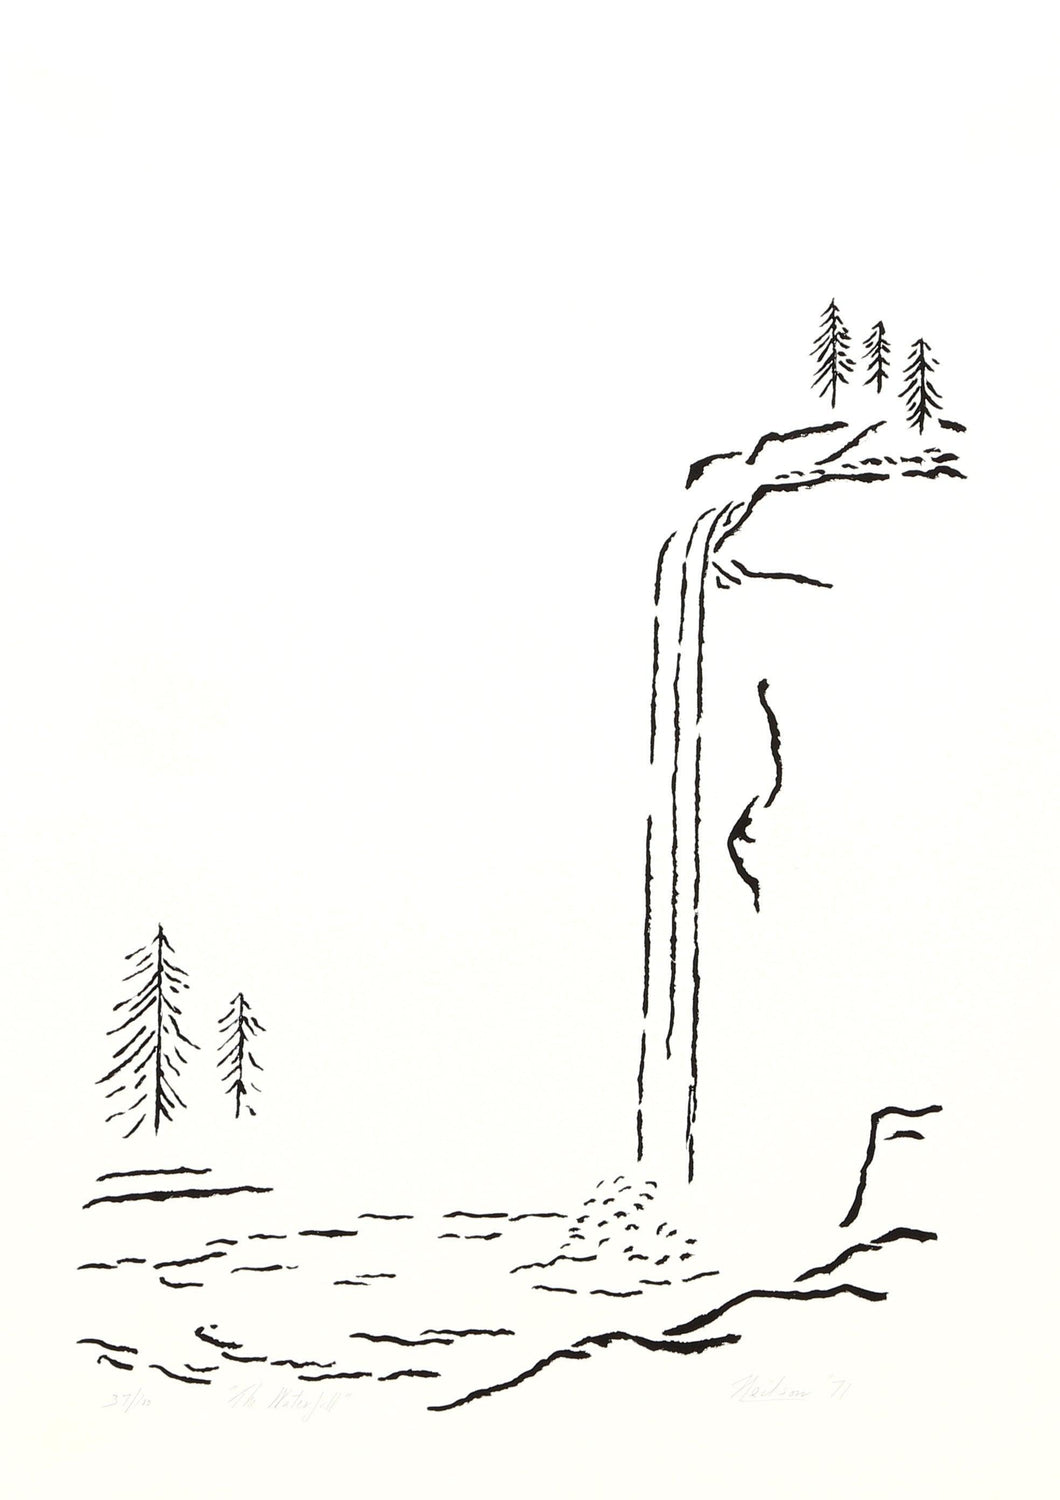 The Waterfall Lithograph | Winthrop Neilson,{{product.type}}